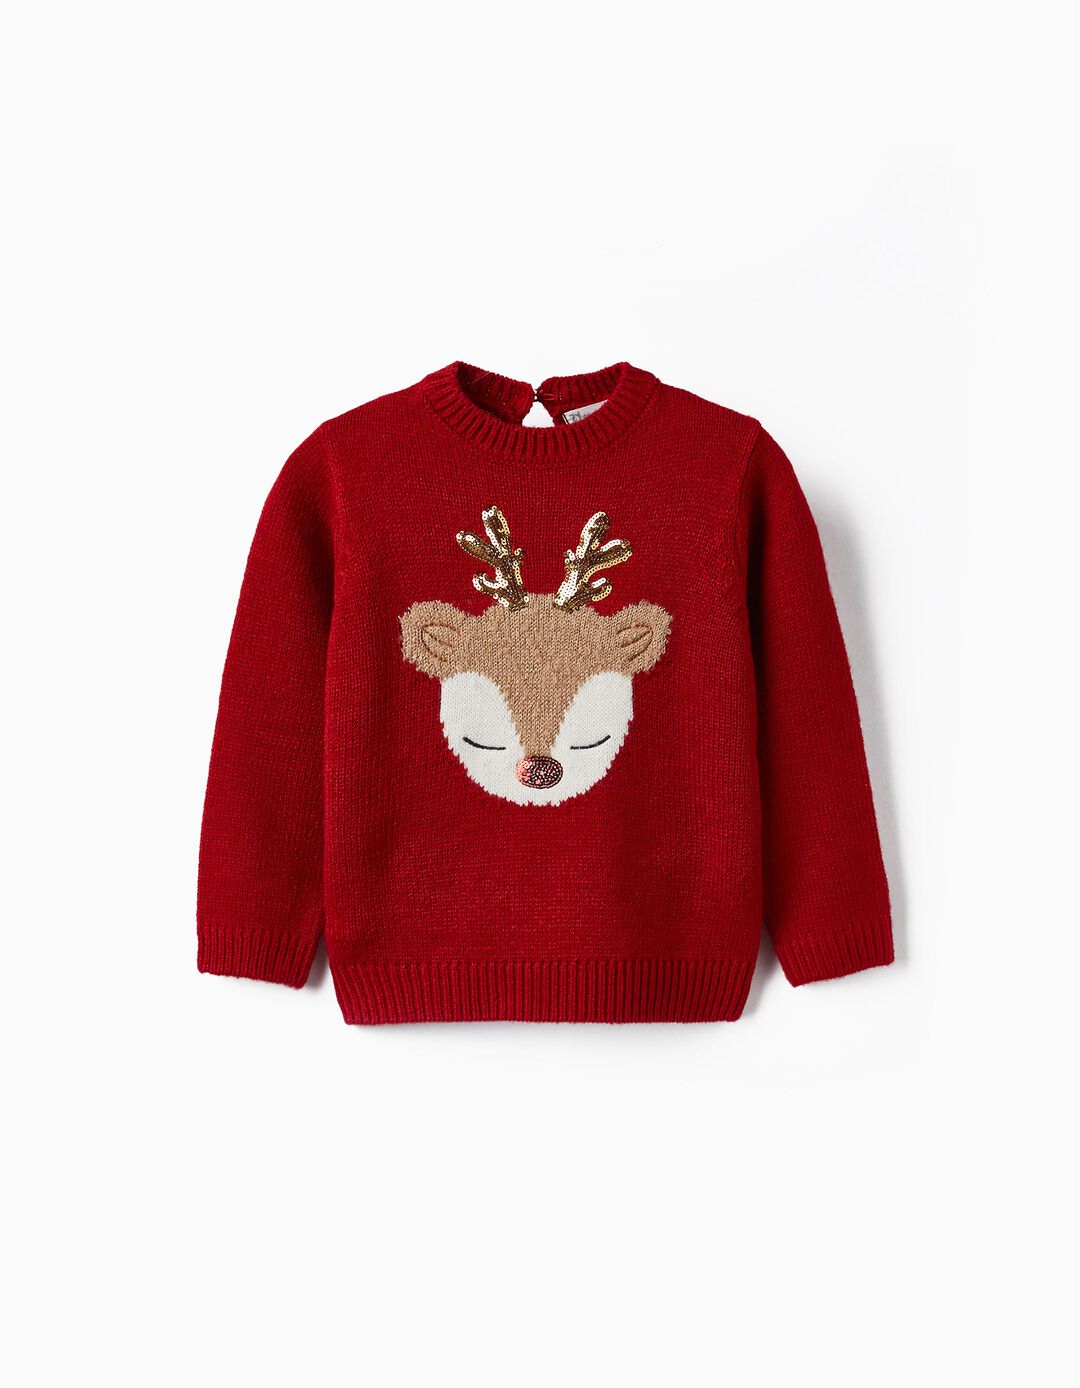 Knitted Jumper for Baby Girls 'Reindeer', Red